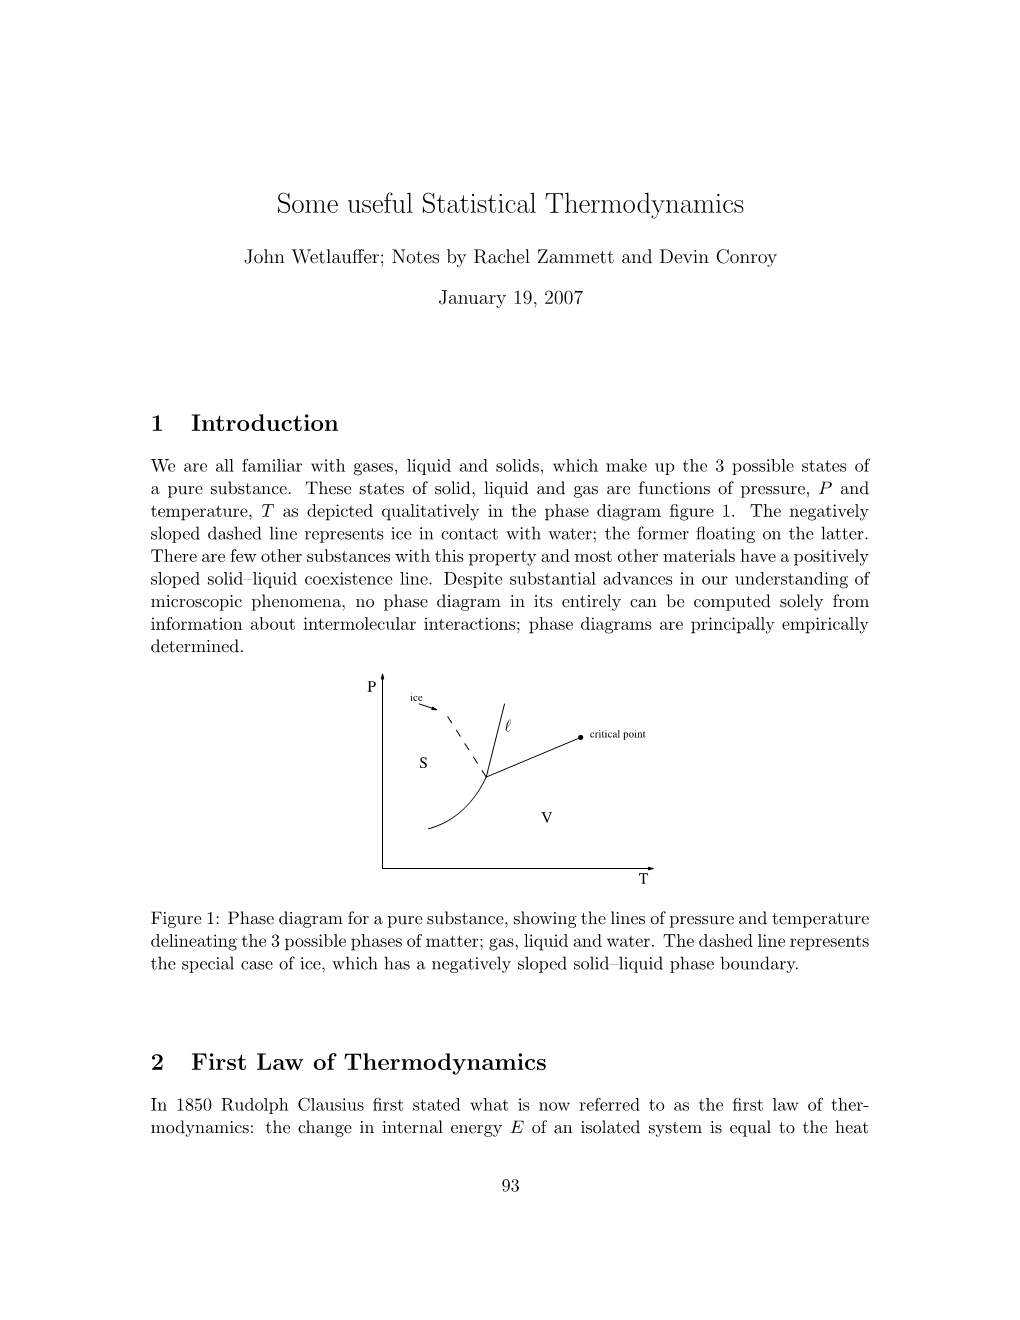 Some Useful Statistical Thermodynamics